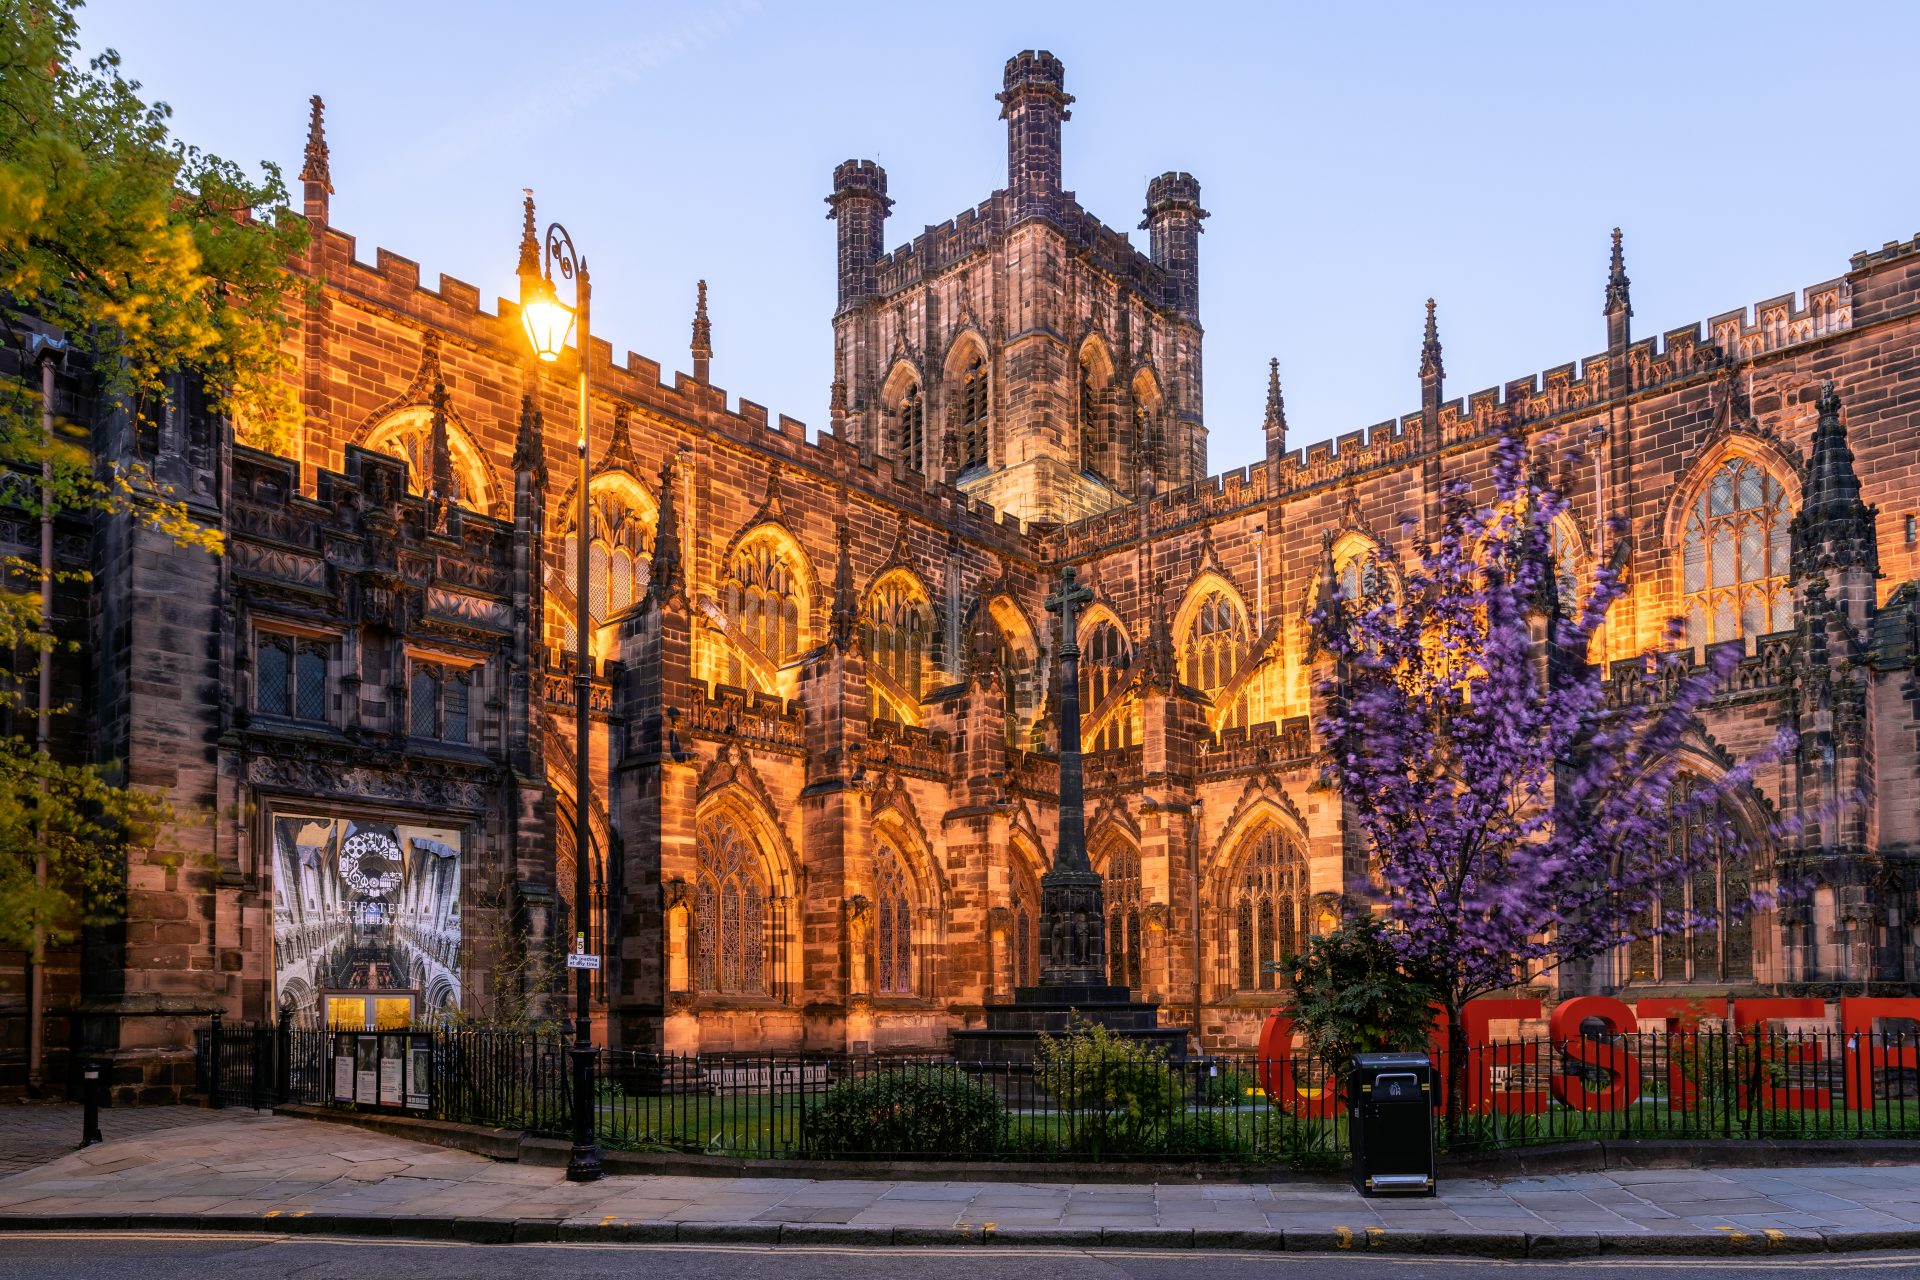 Why Chester Cathedral?